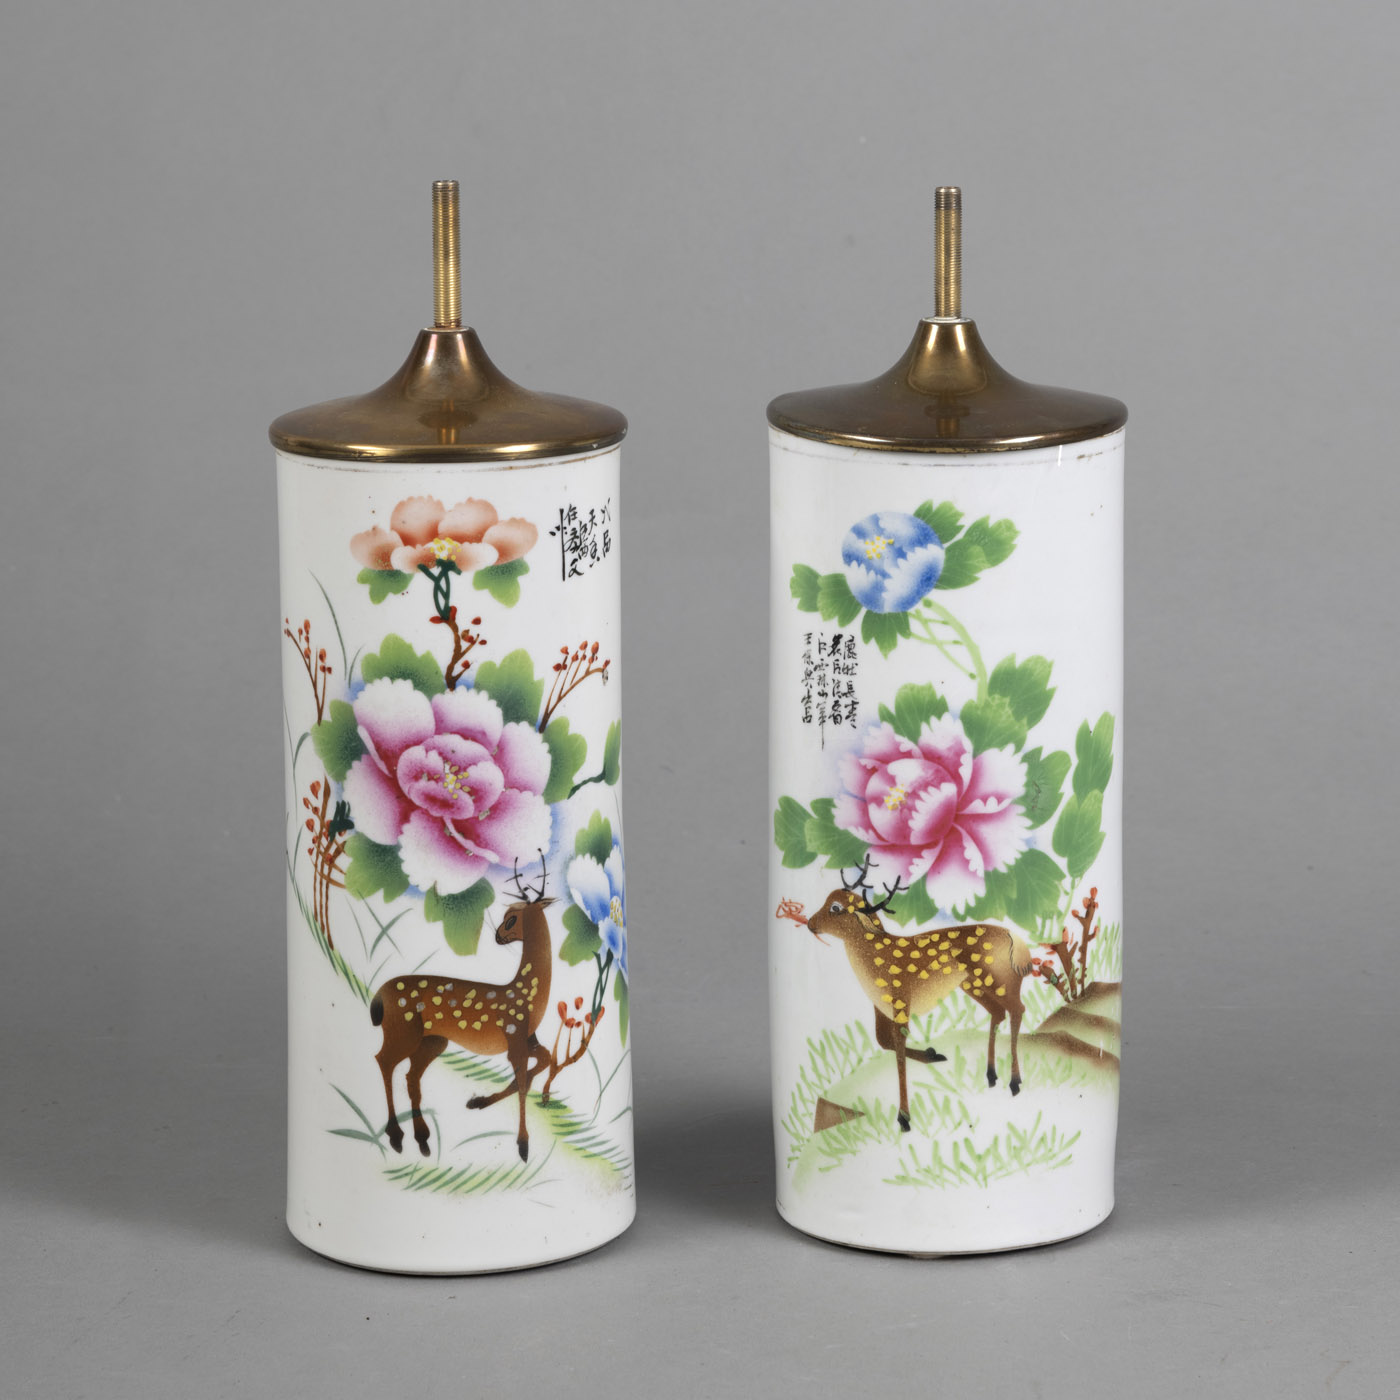 <b>A PAIR OF CYLINDRICAL POLYCHROME PAINTED HAT STANDS DEPICTING PEONIES AND DEER</b>